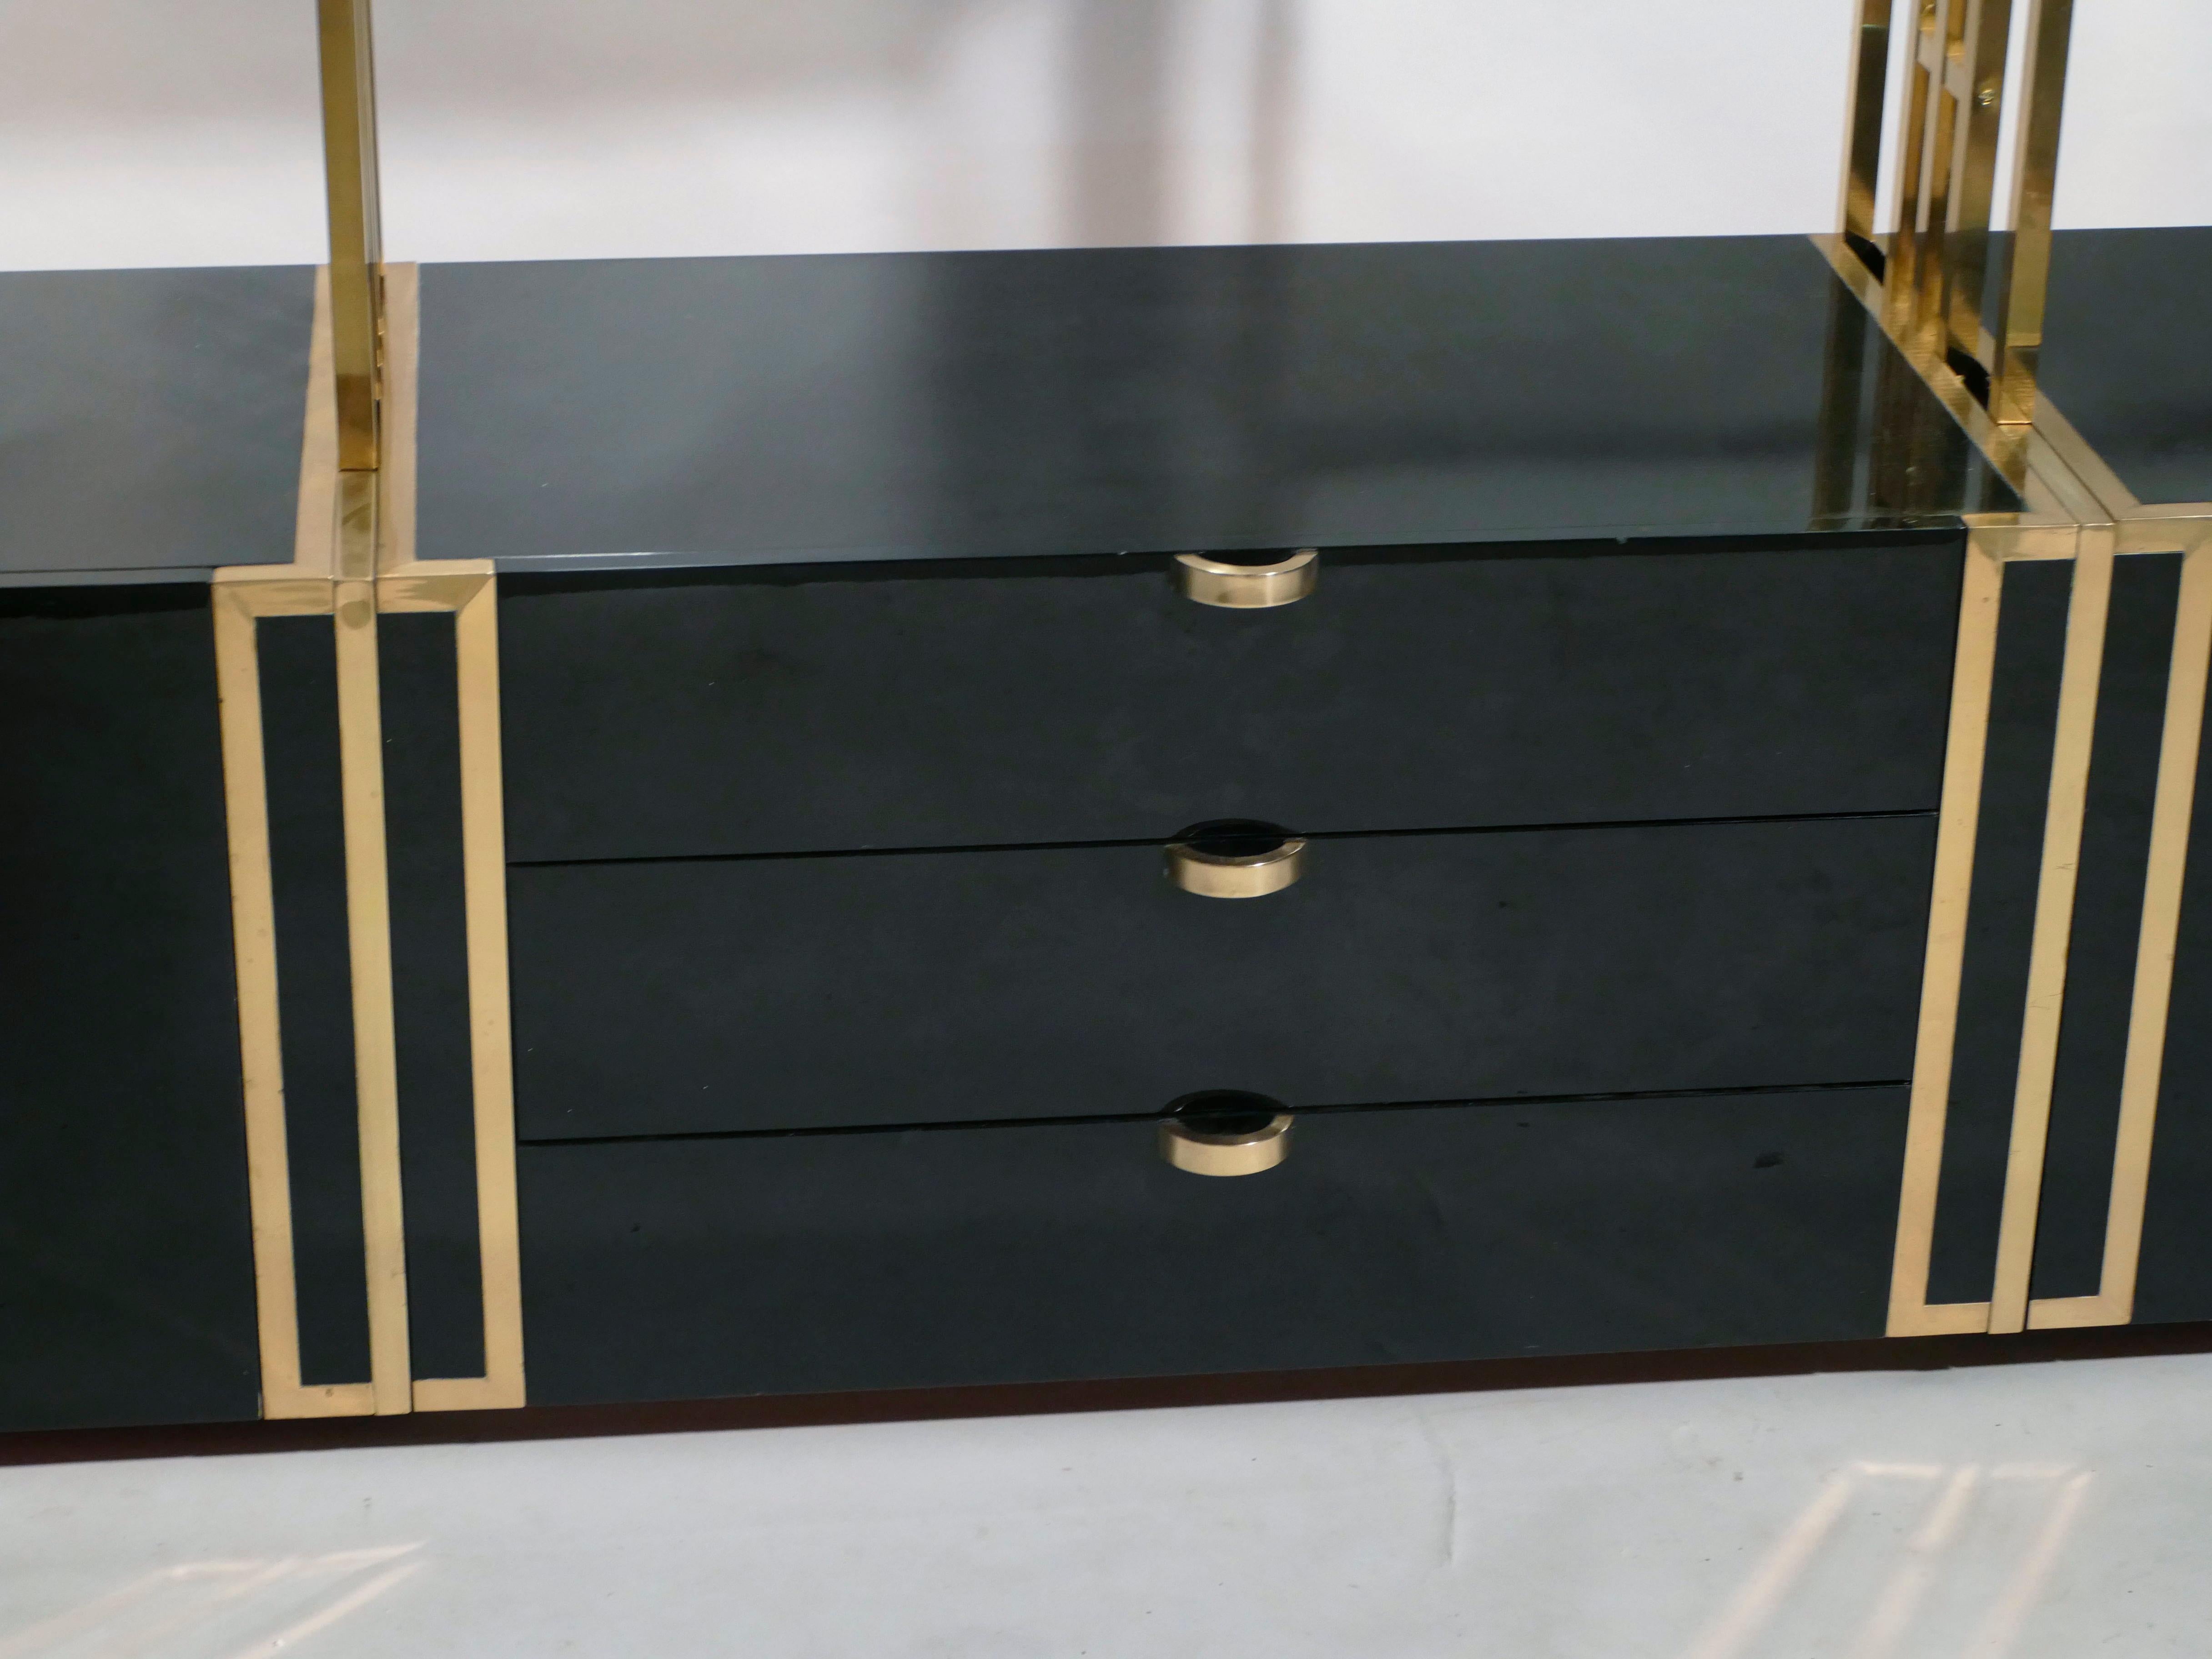 Rare Kim Moltzer French Lacquer and Brass Shelves, 1970s (Messing)